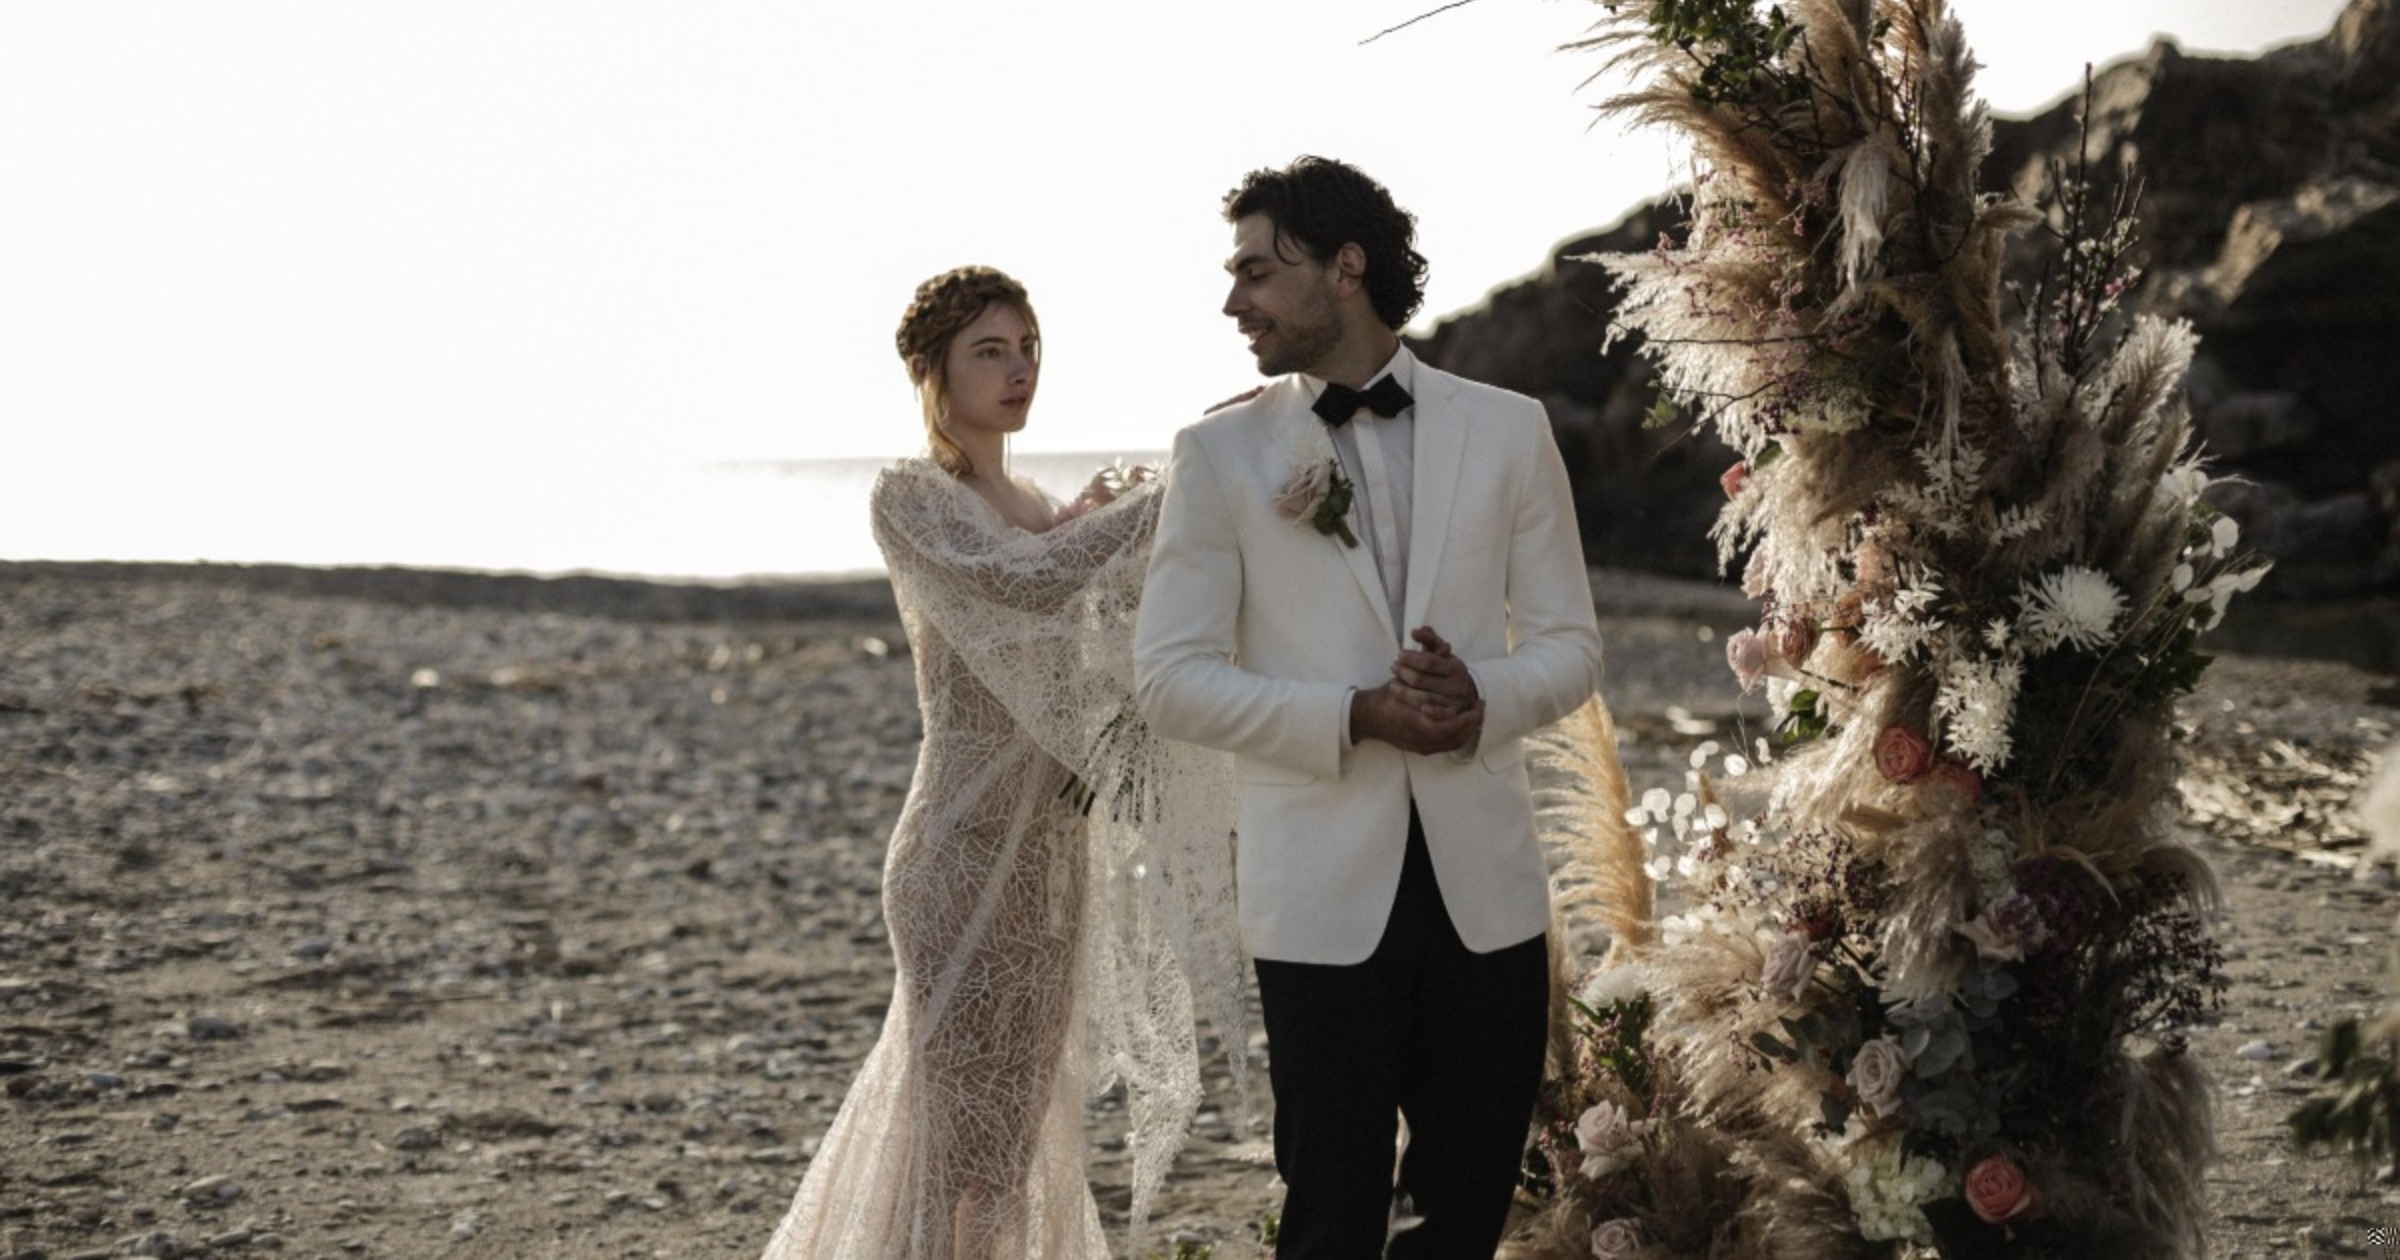 A romantic inspo shoot on Crete featuring pink and black accents